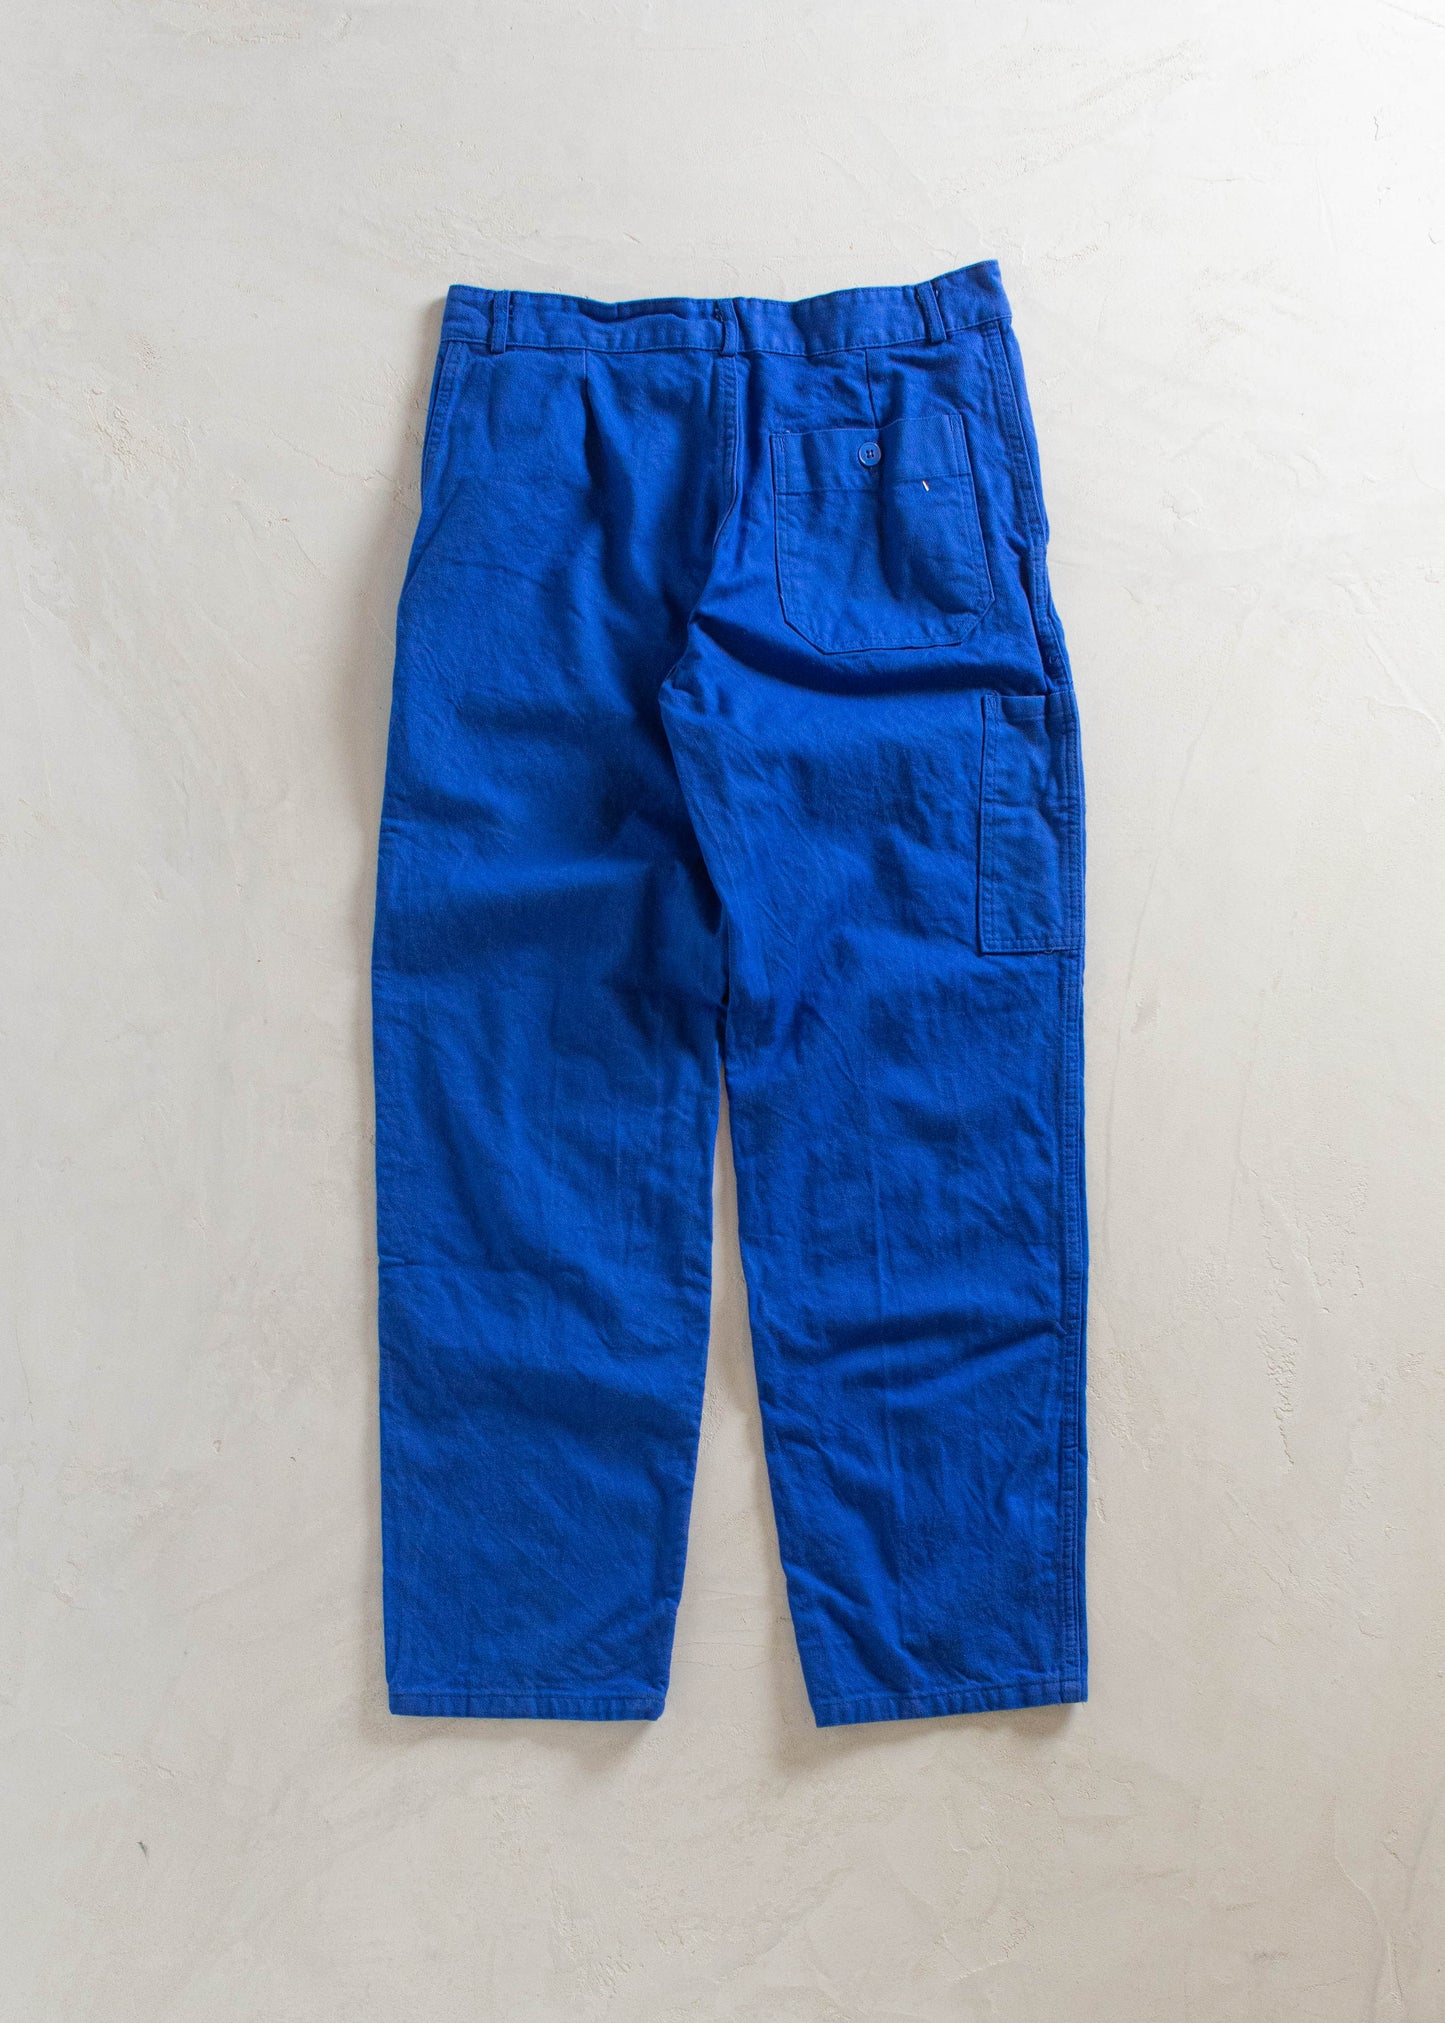 1980s L'ideal French Workwear Chore Pants Size Women's 31 Men's 33